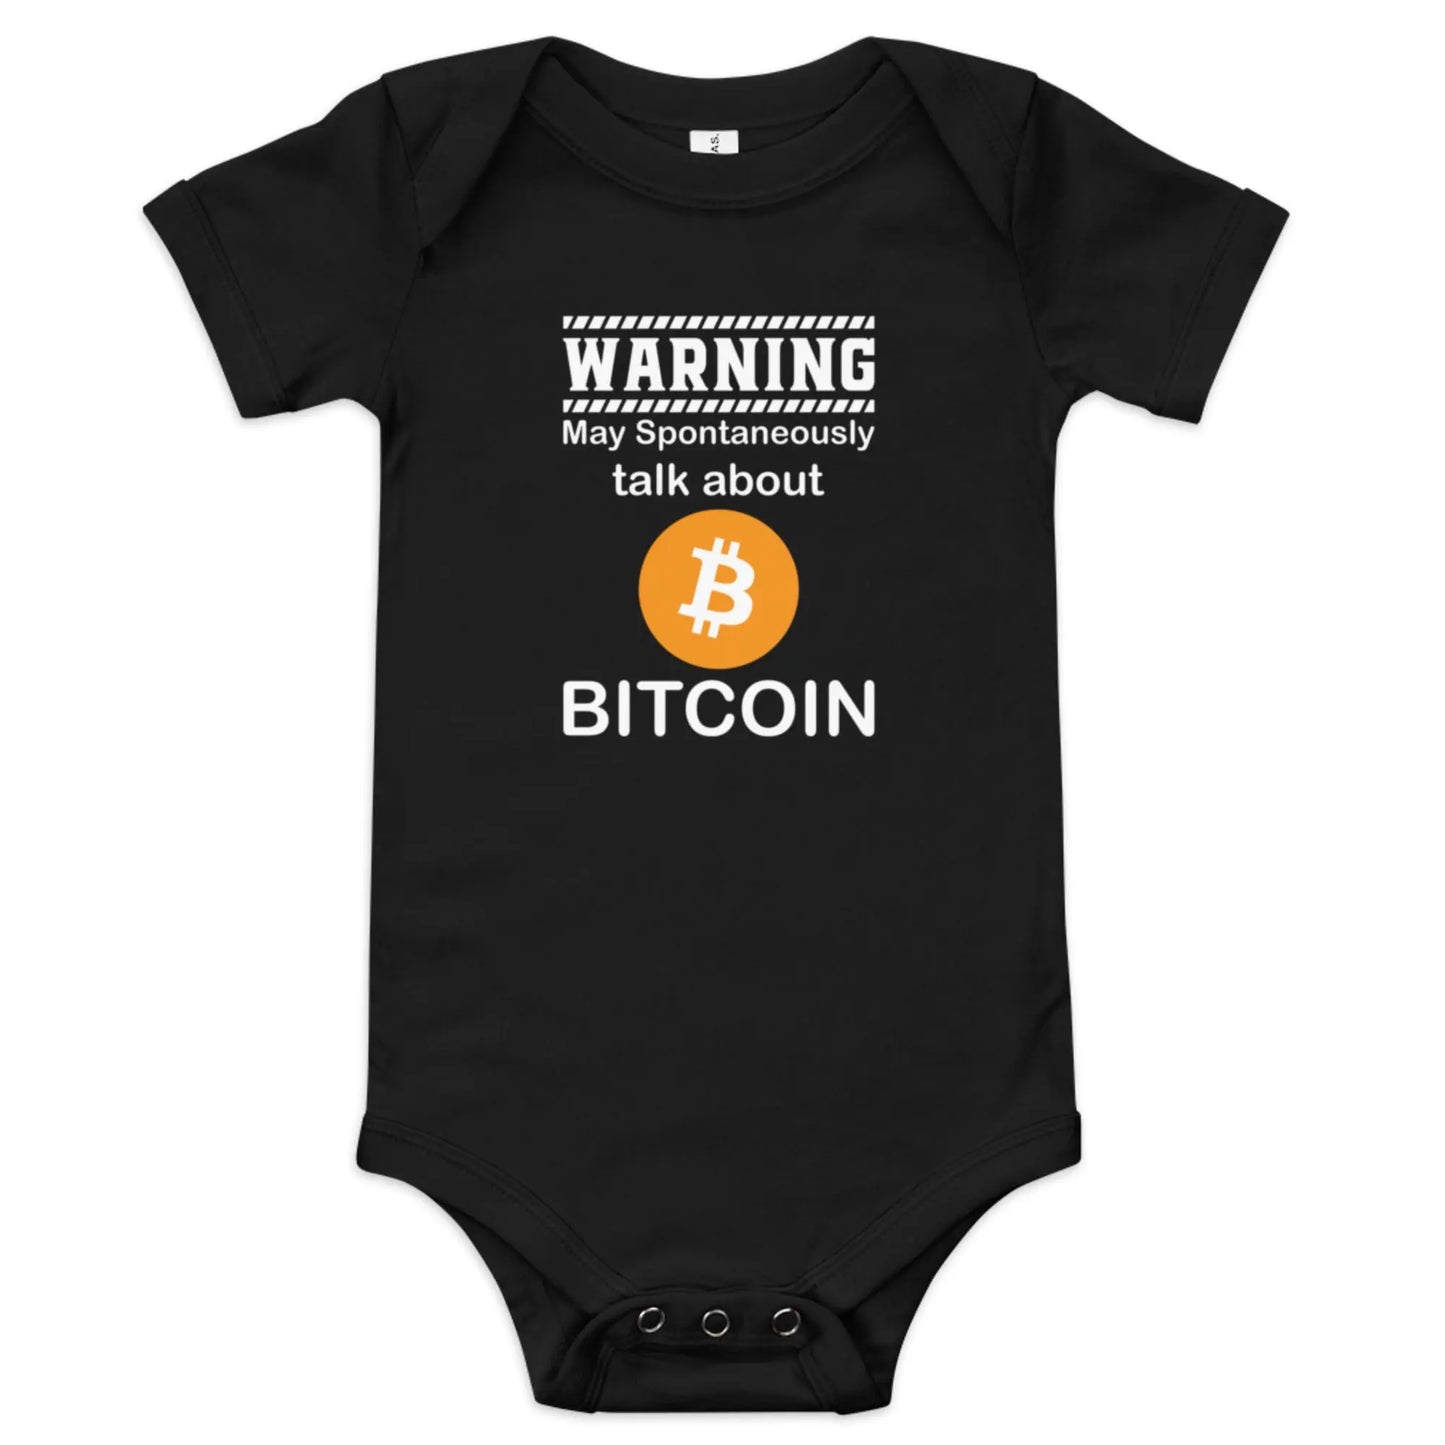 Talk About Bitcoin - Baby Bitcoin Body Suit - One Piece with Short Sleeve Black